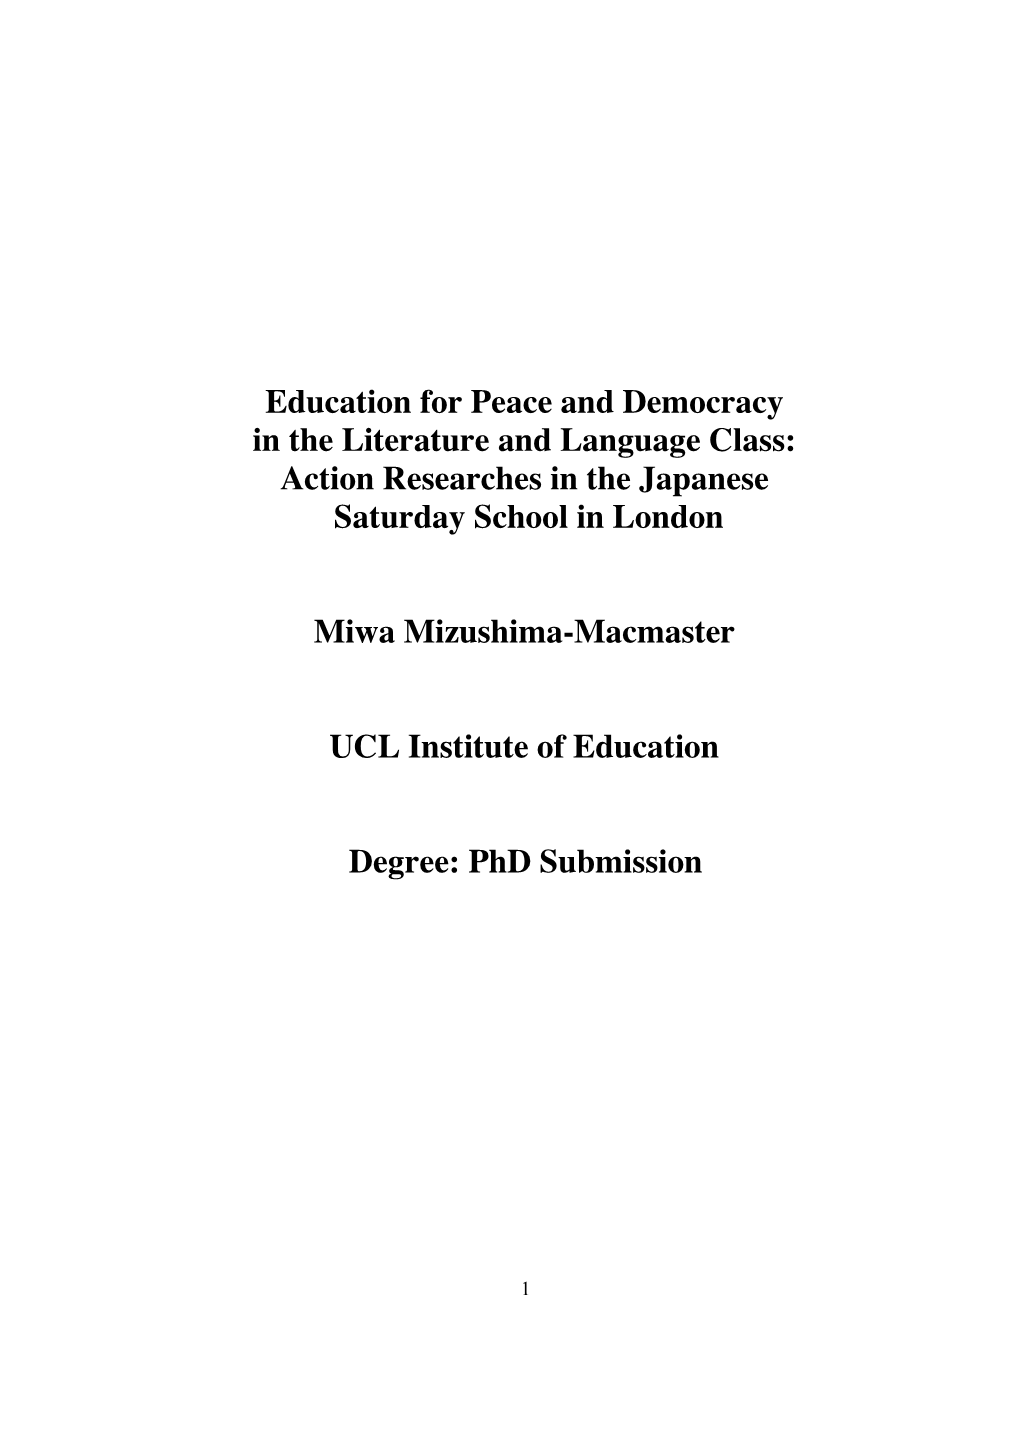 Education for Peace and Democracy in the Literature and Language Class: Action Researches in the Japanese Saturday School in London